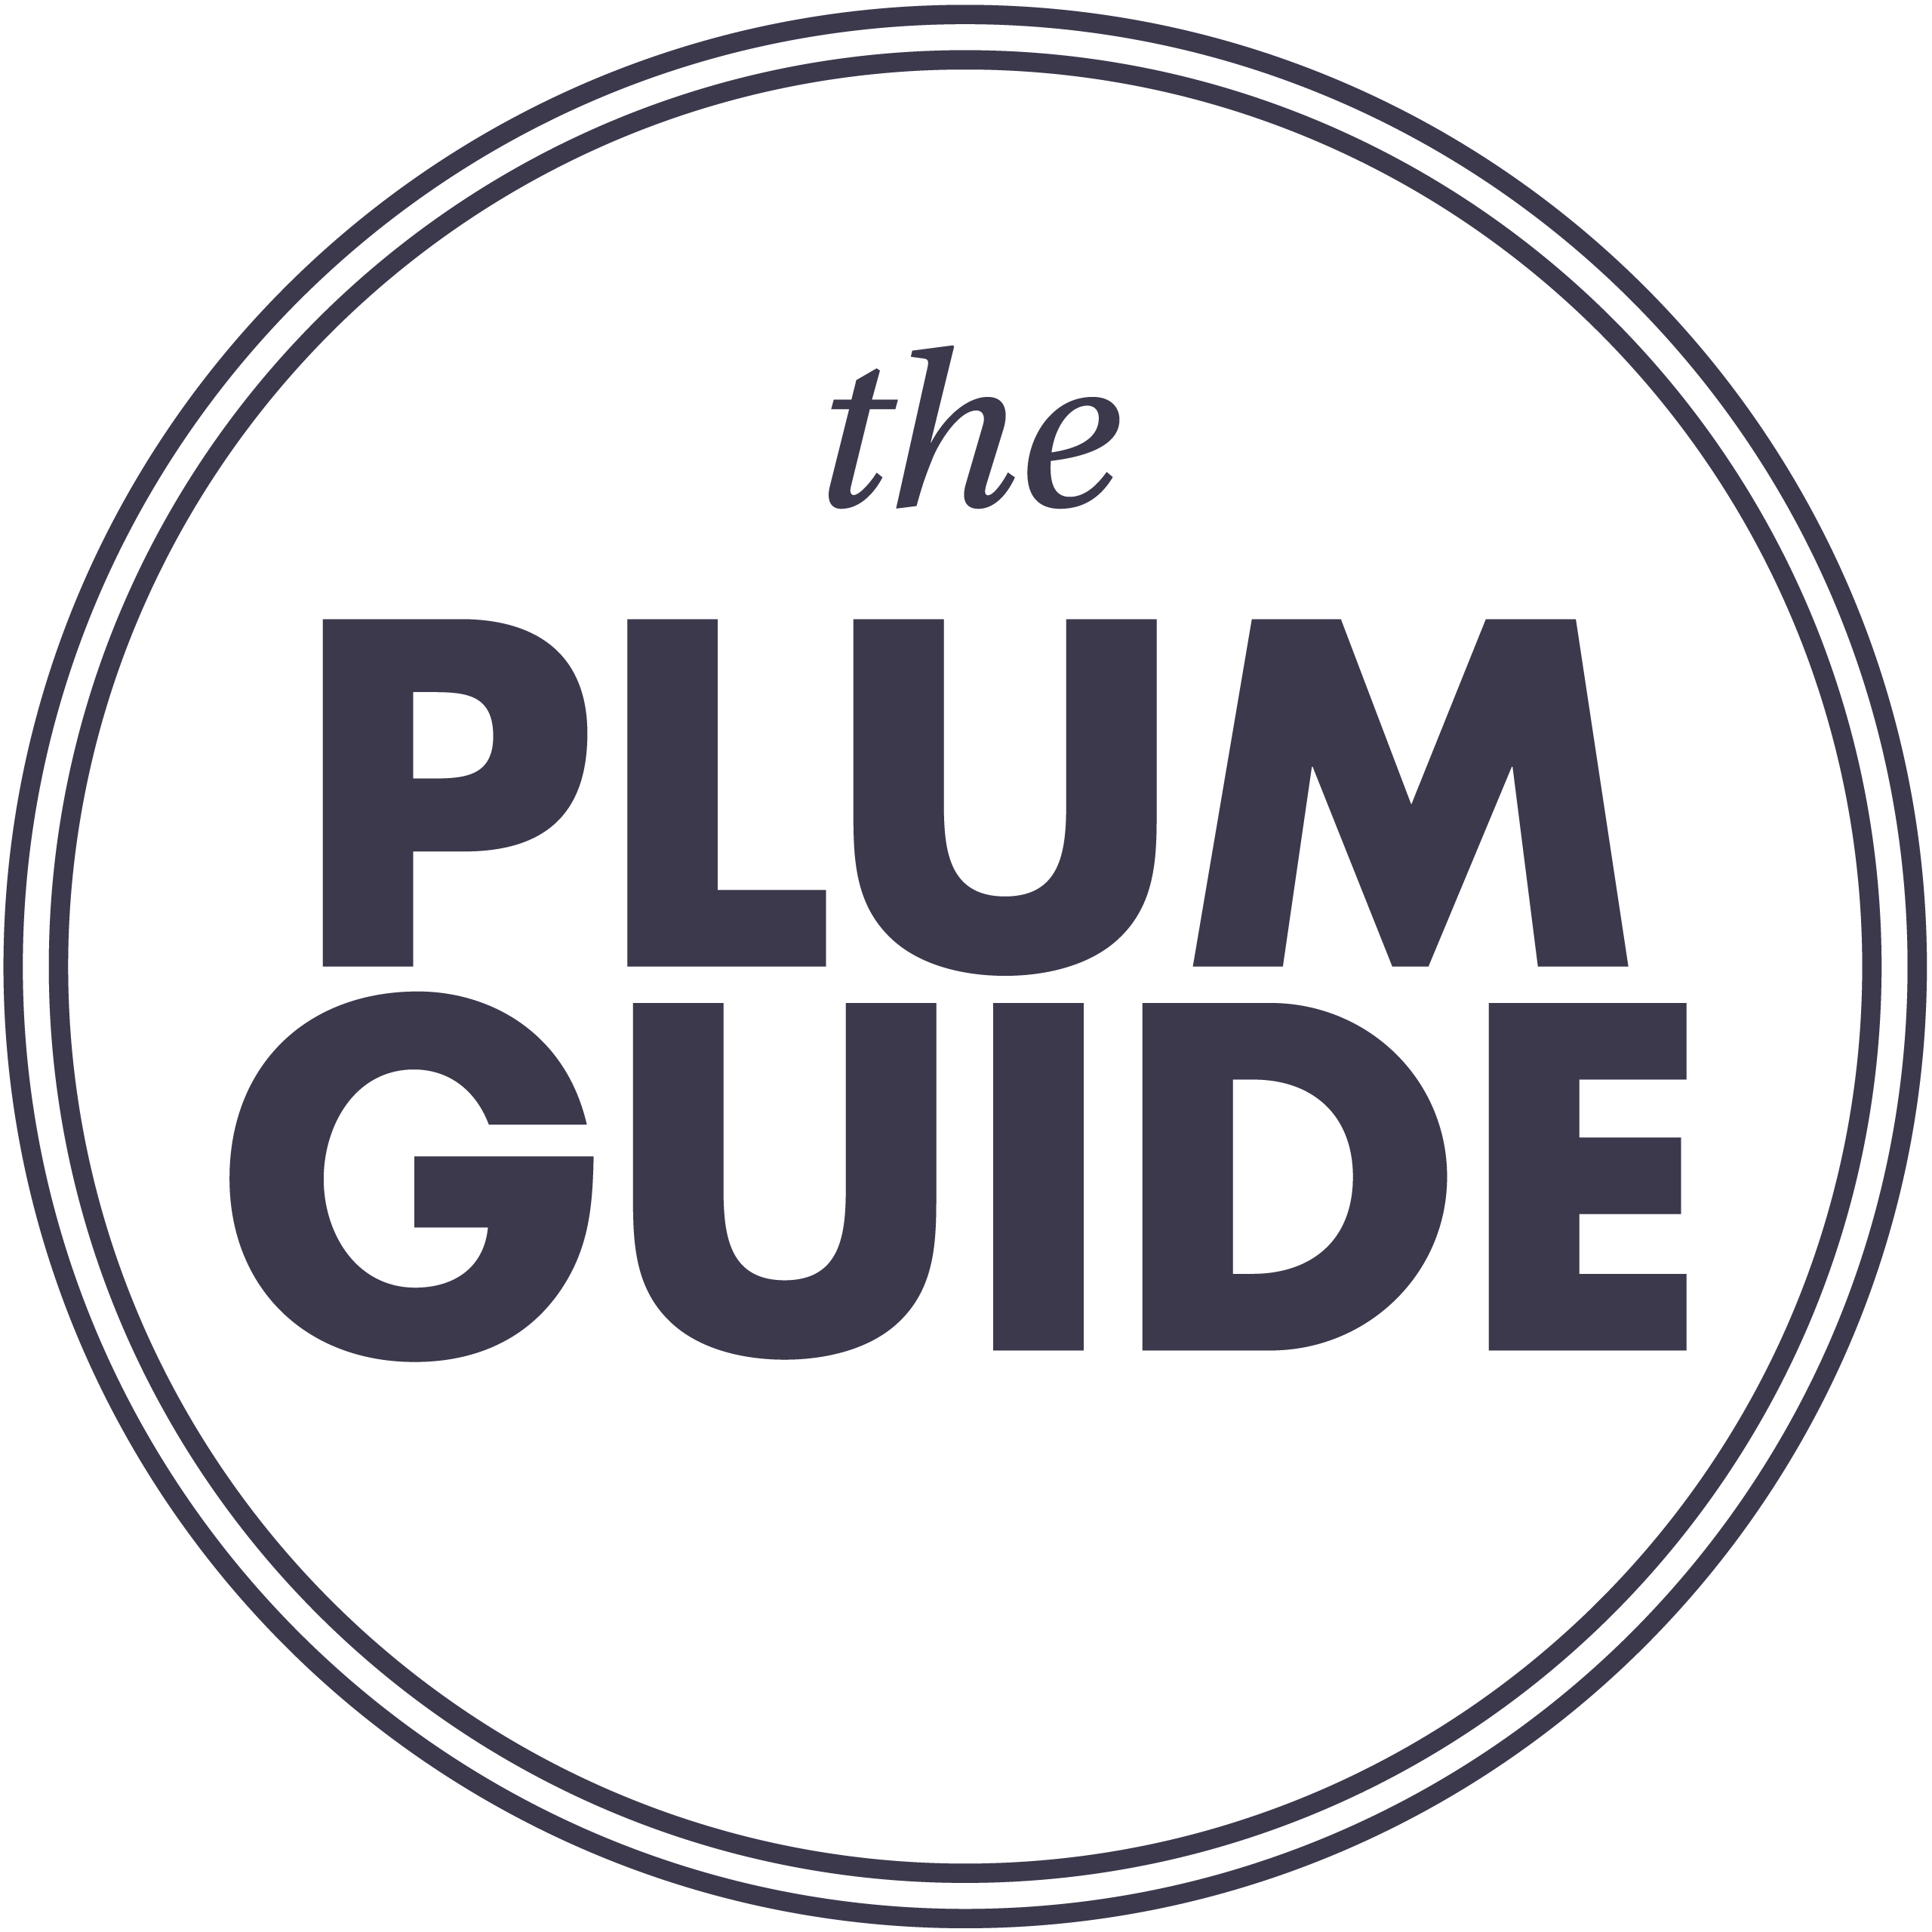 Plum Logo - The world's most inspiring and creative vacation rentals. The Plum